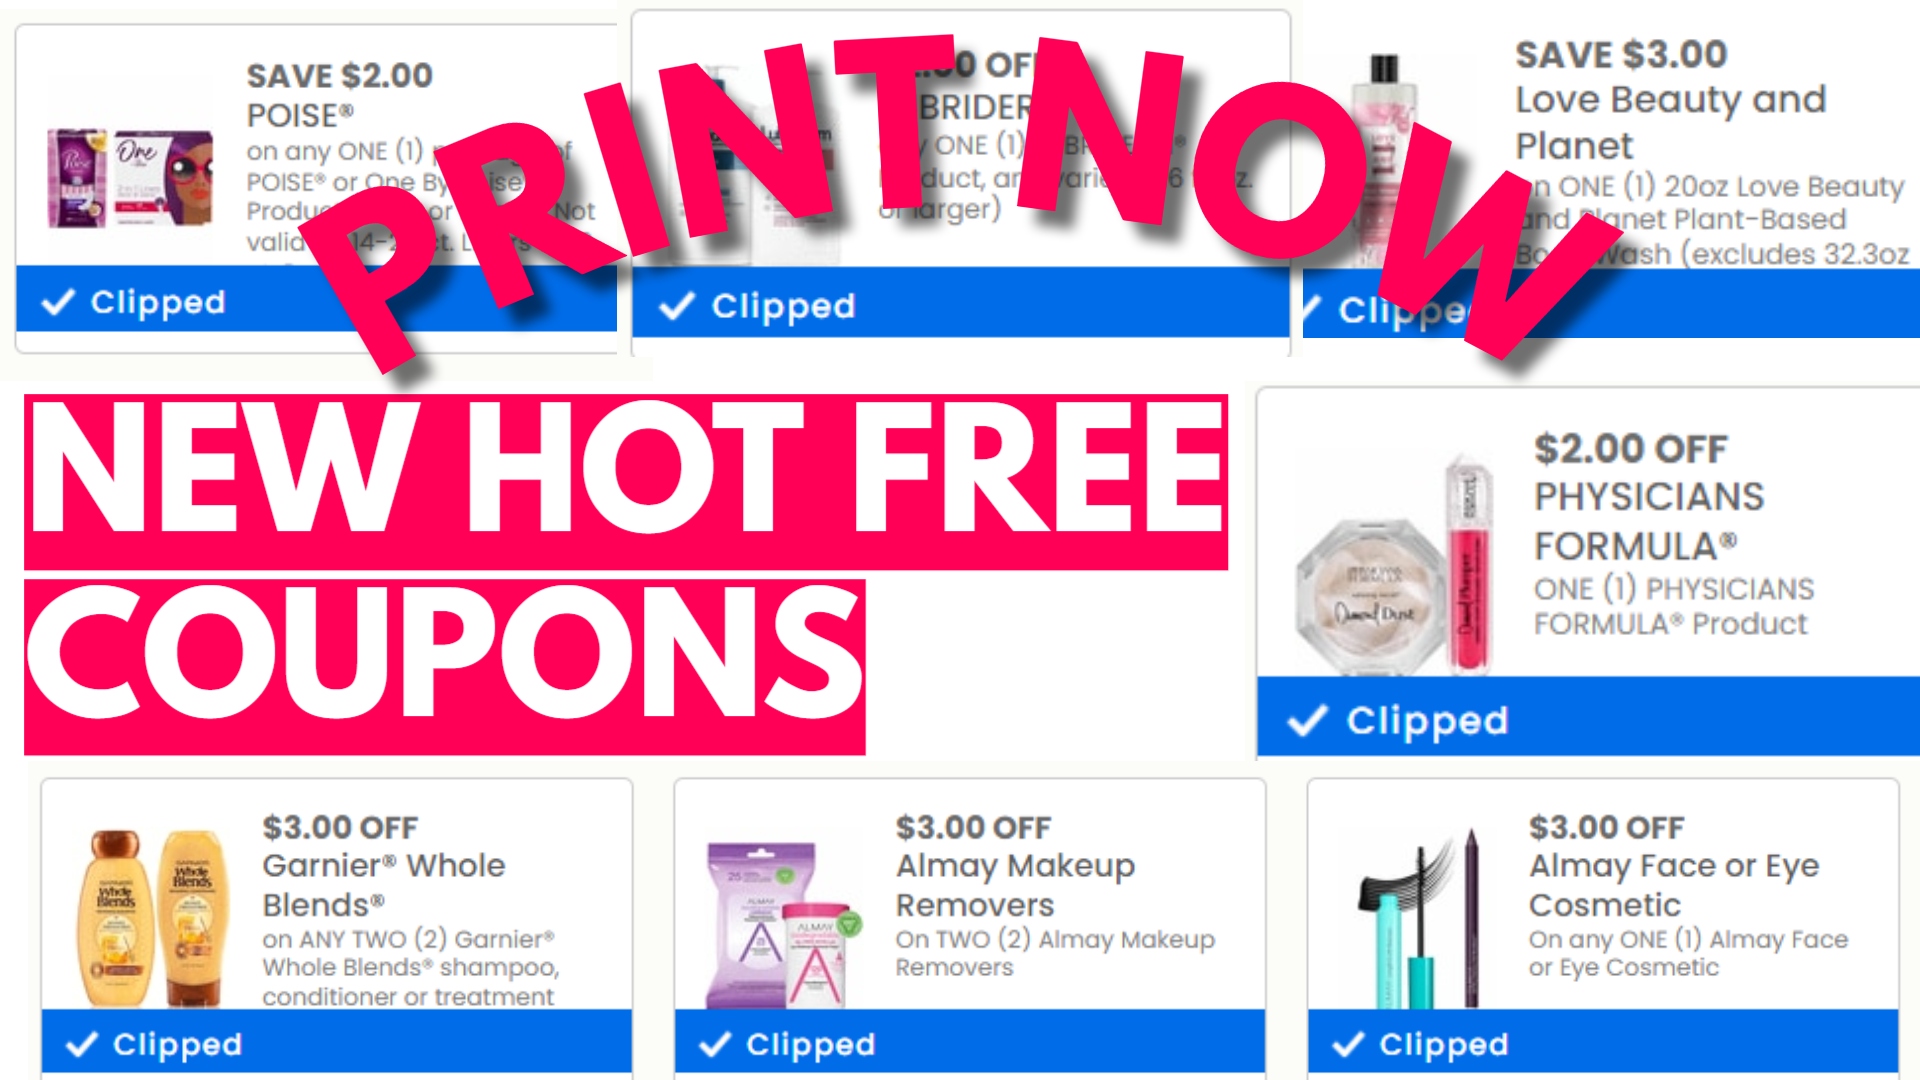 NEW HOT Coupons Just Released